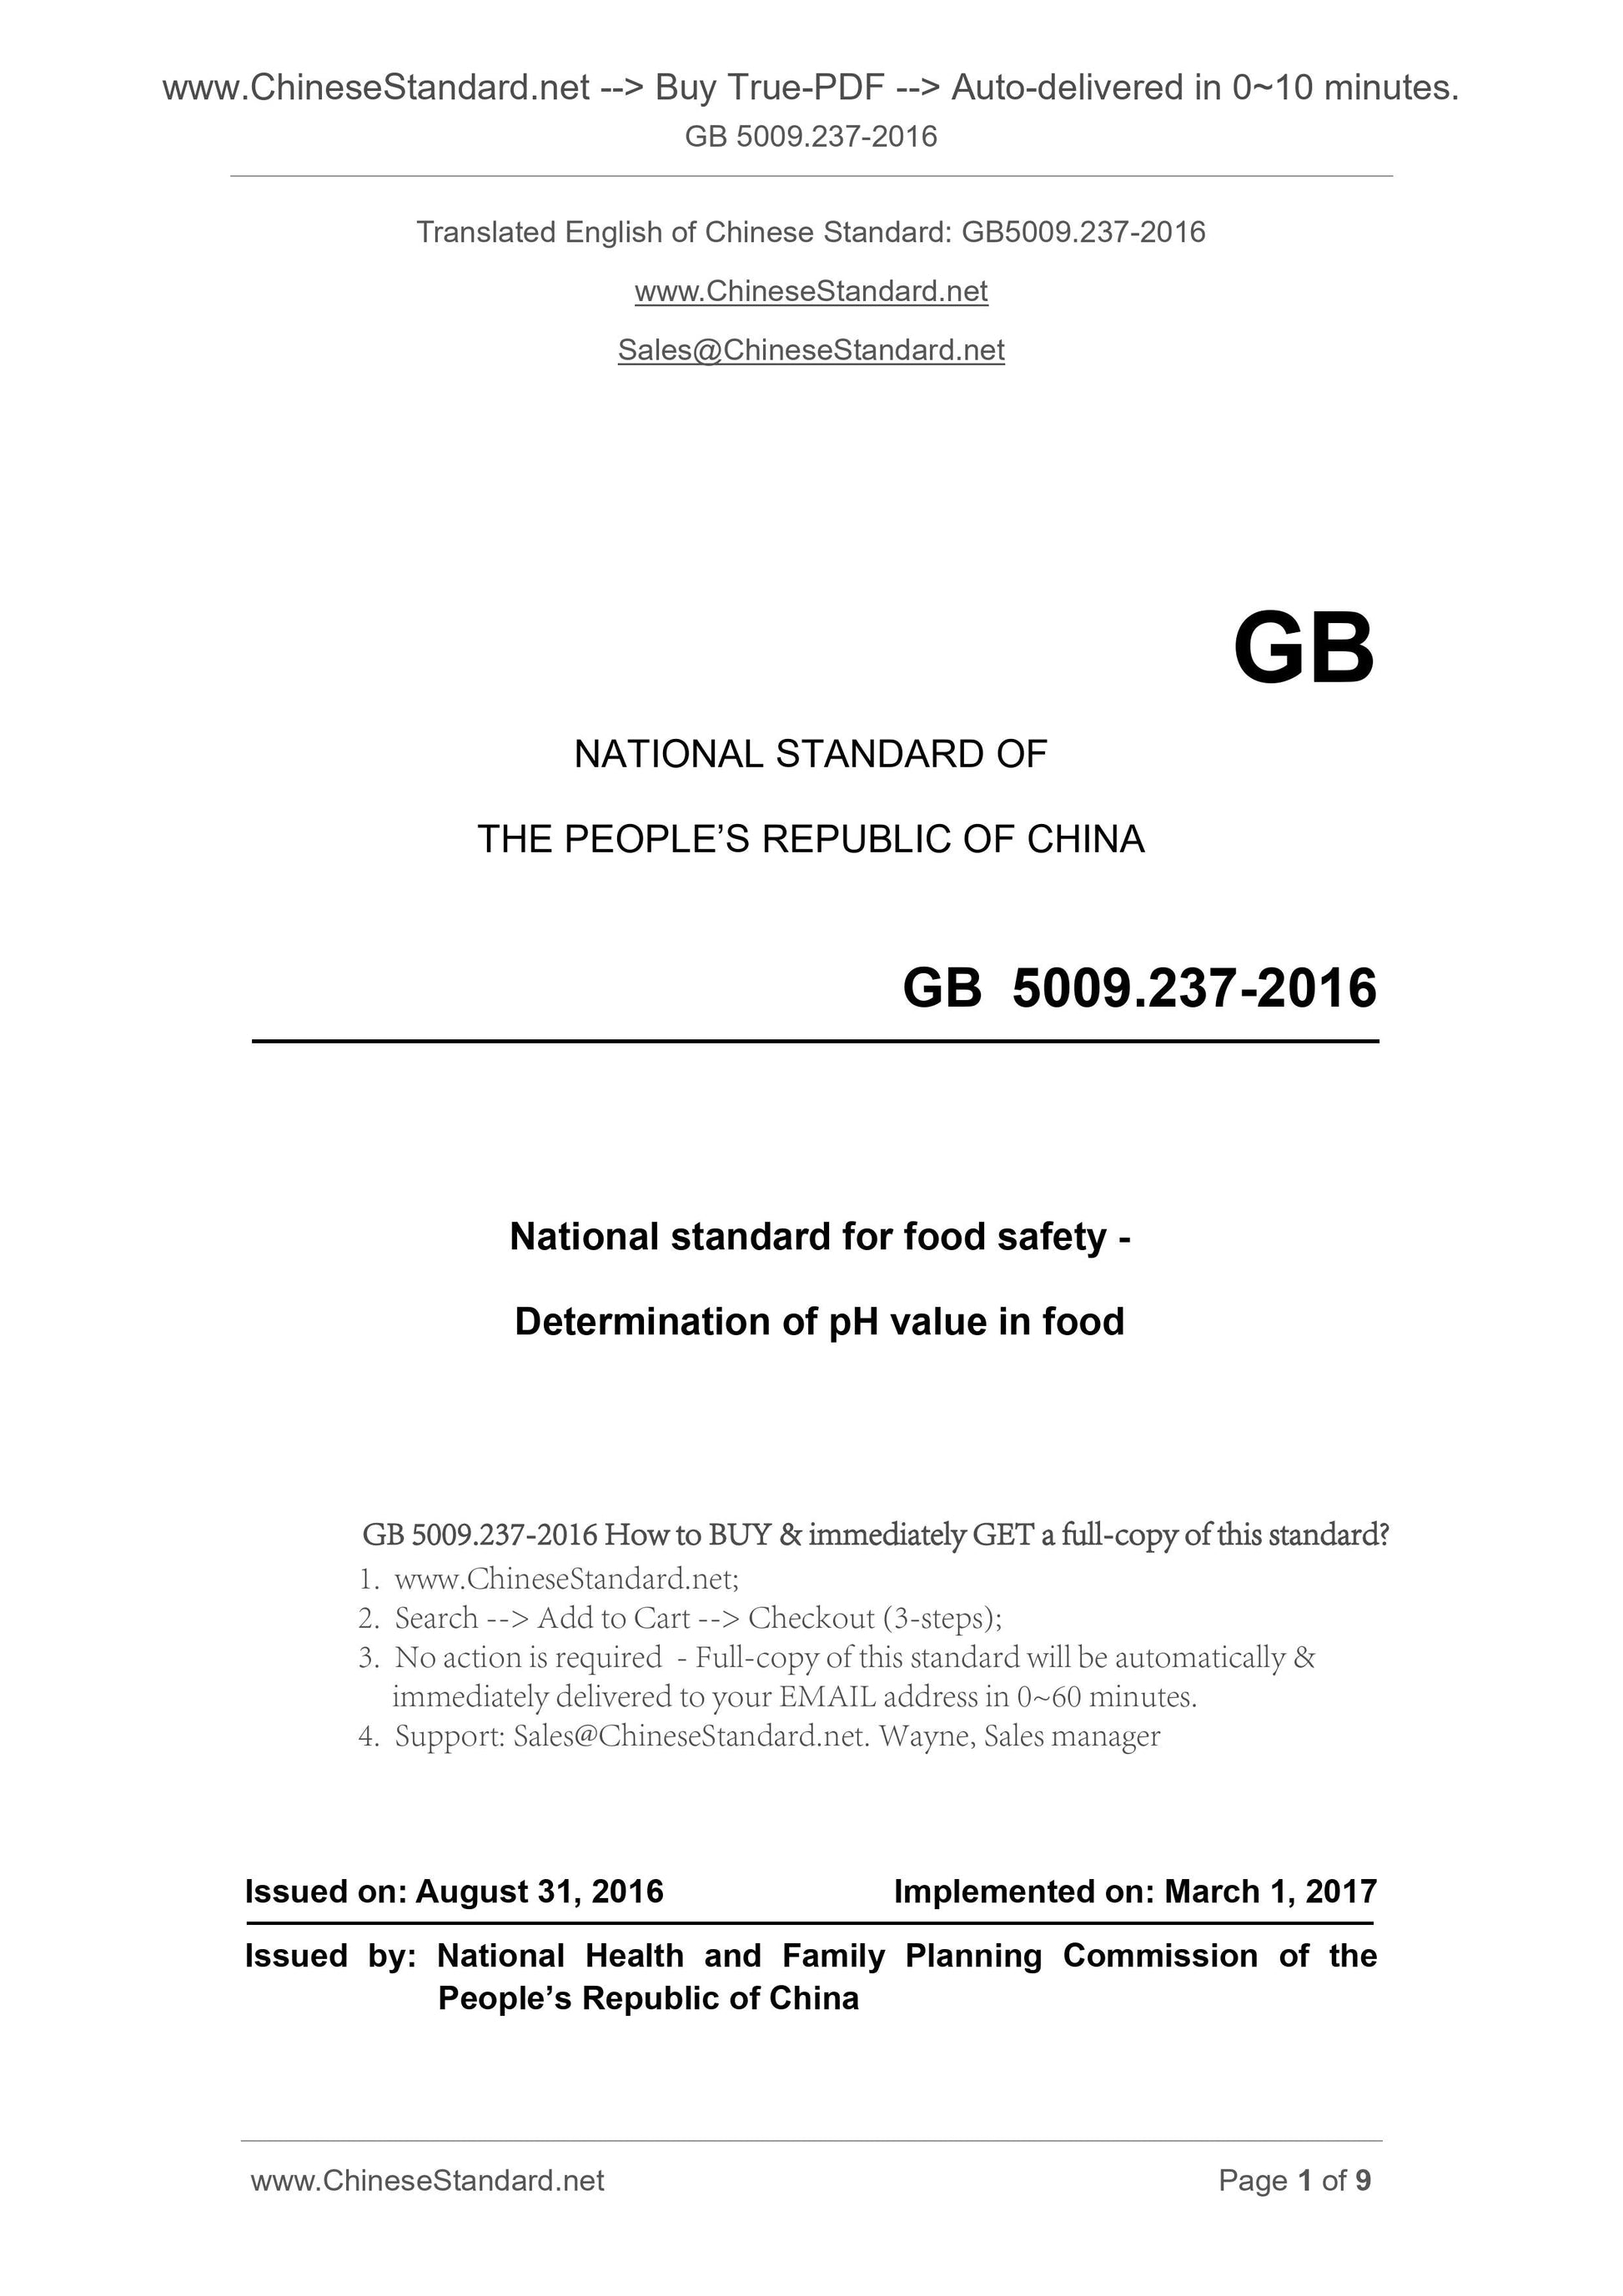 GB 5009.237-2016 Page 1